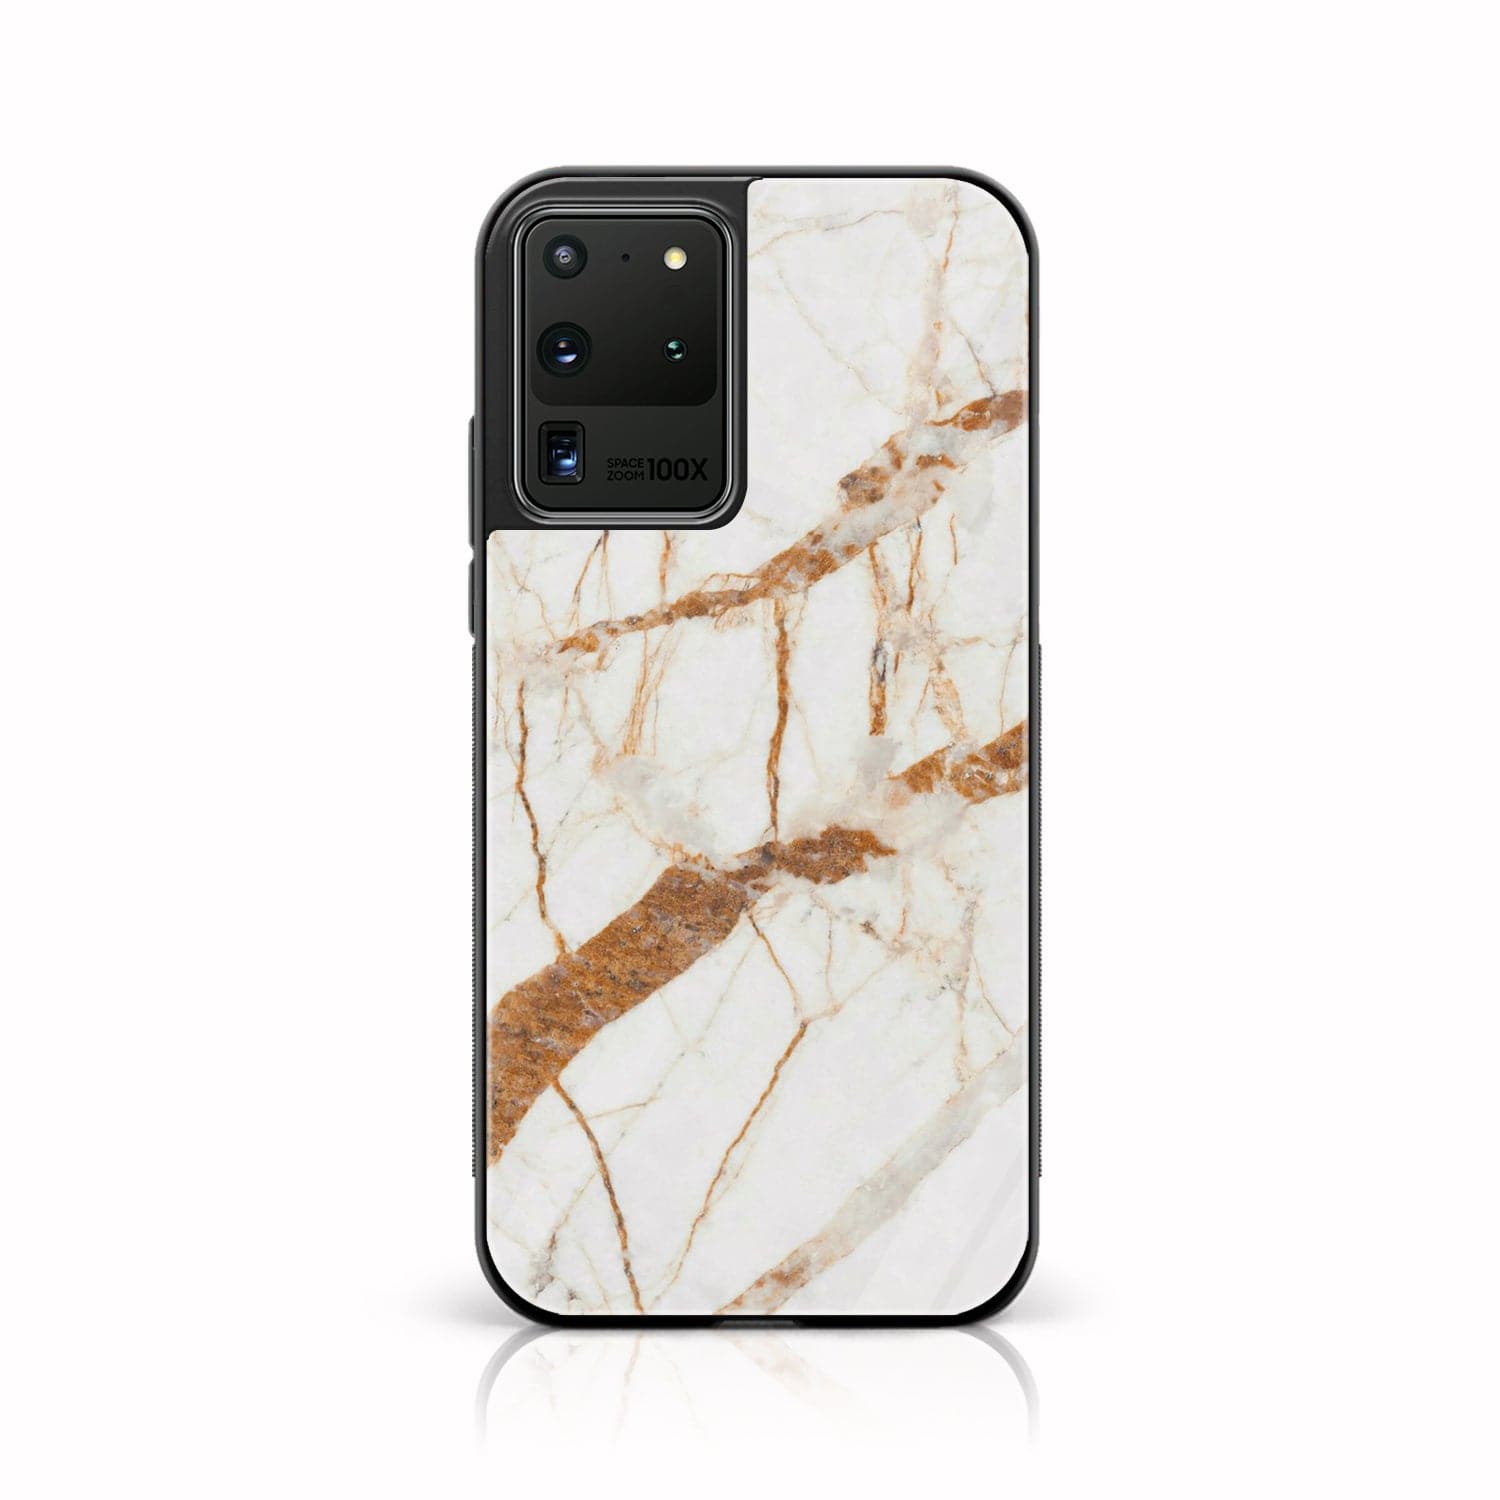 Sasmung Galaxy S20 Ultra - White Marble Series - Premium Printed Glass soft Bumper shock Proof Case